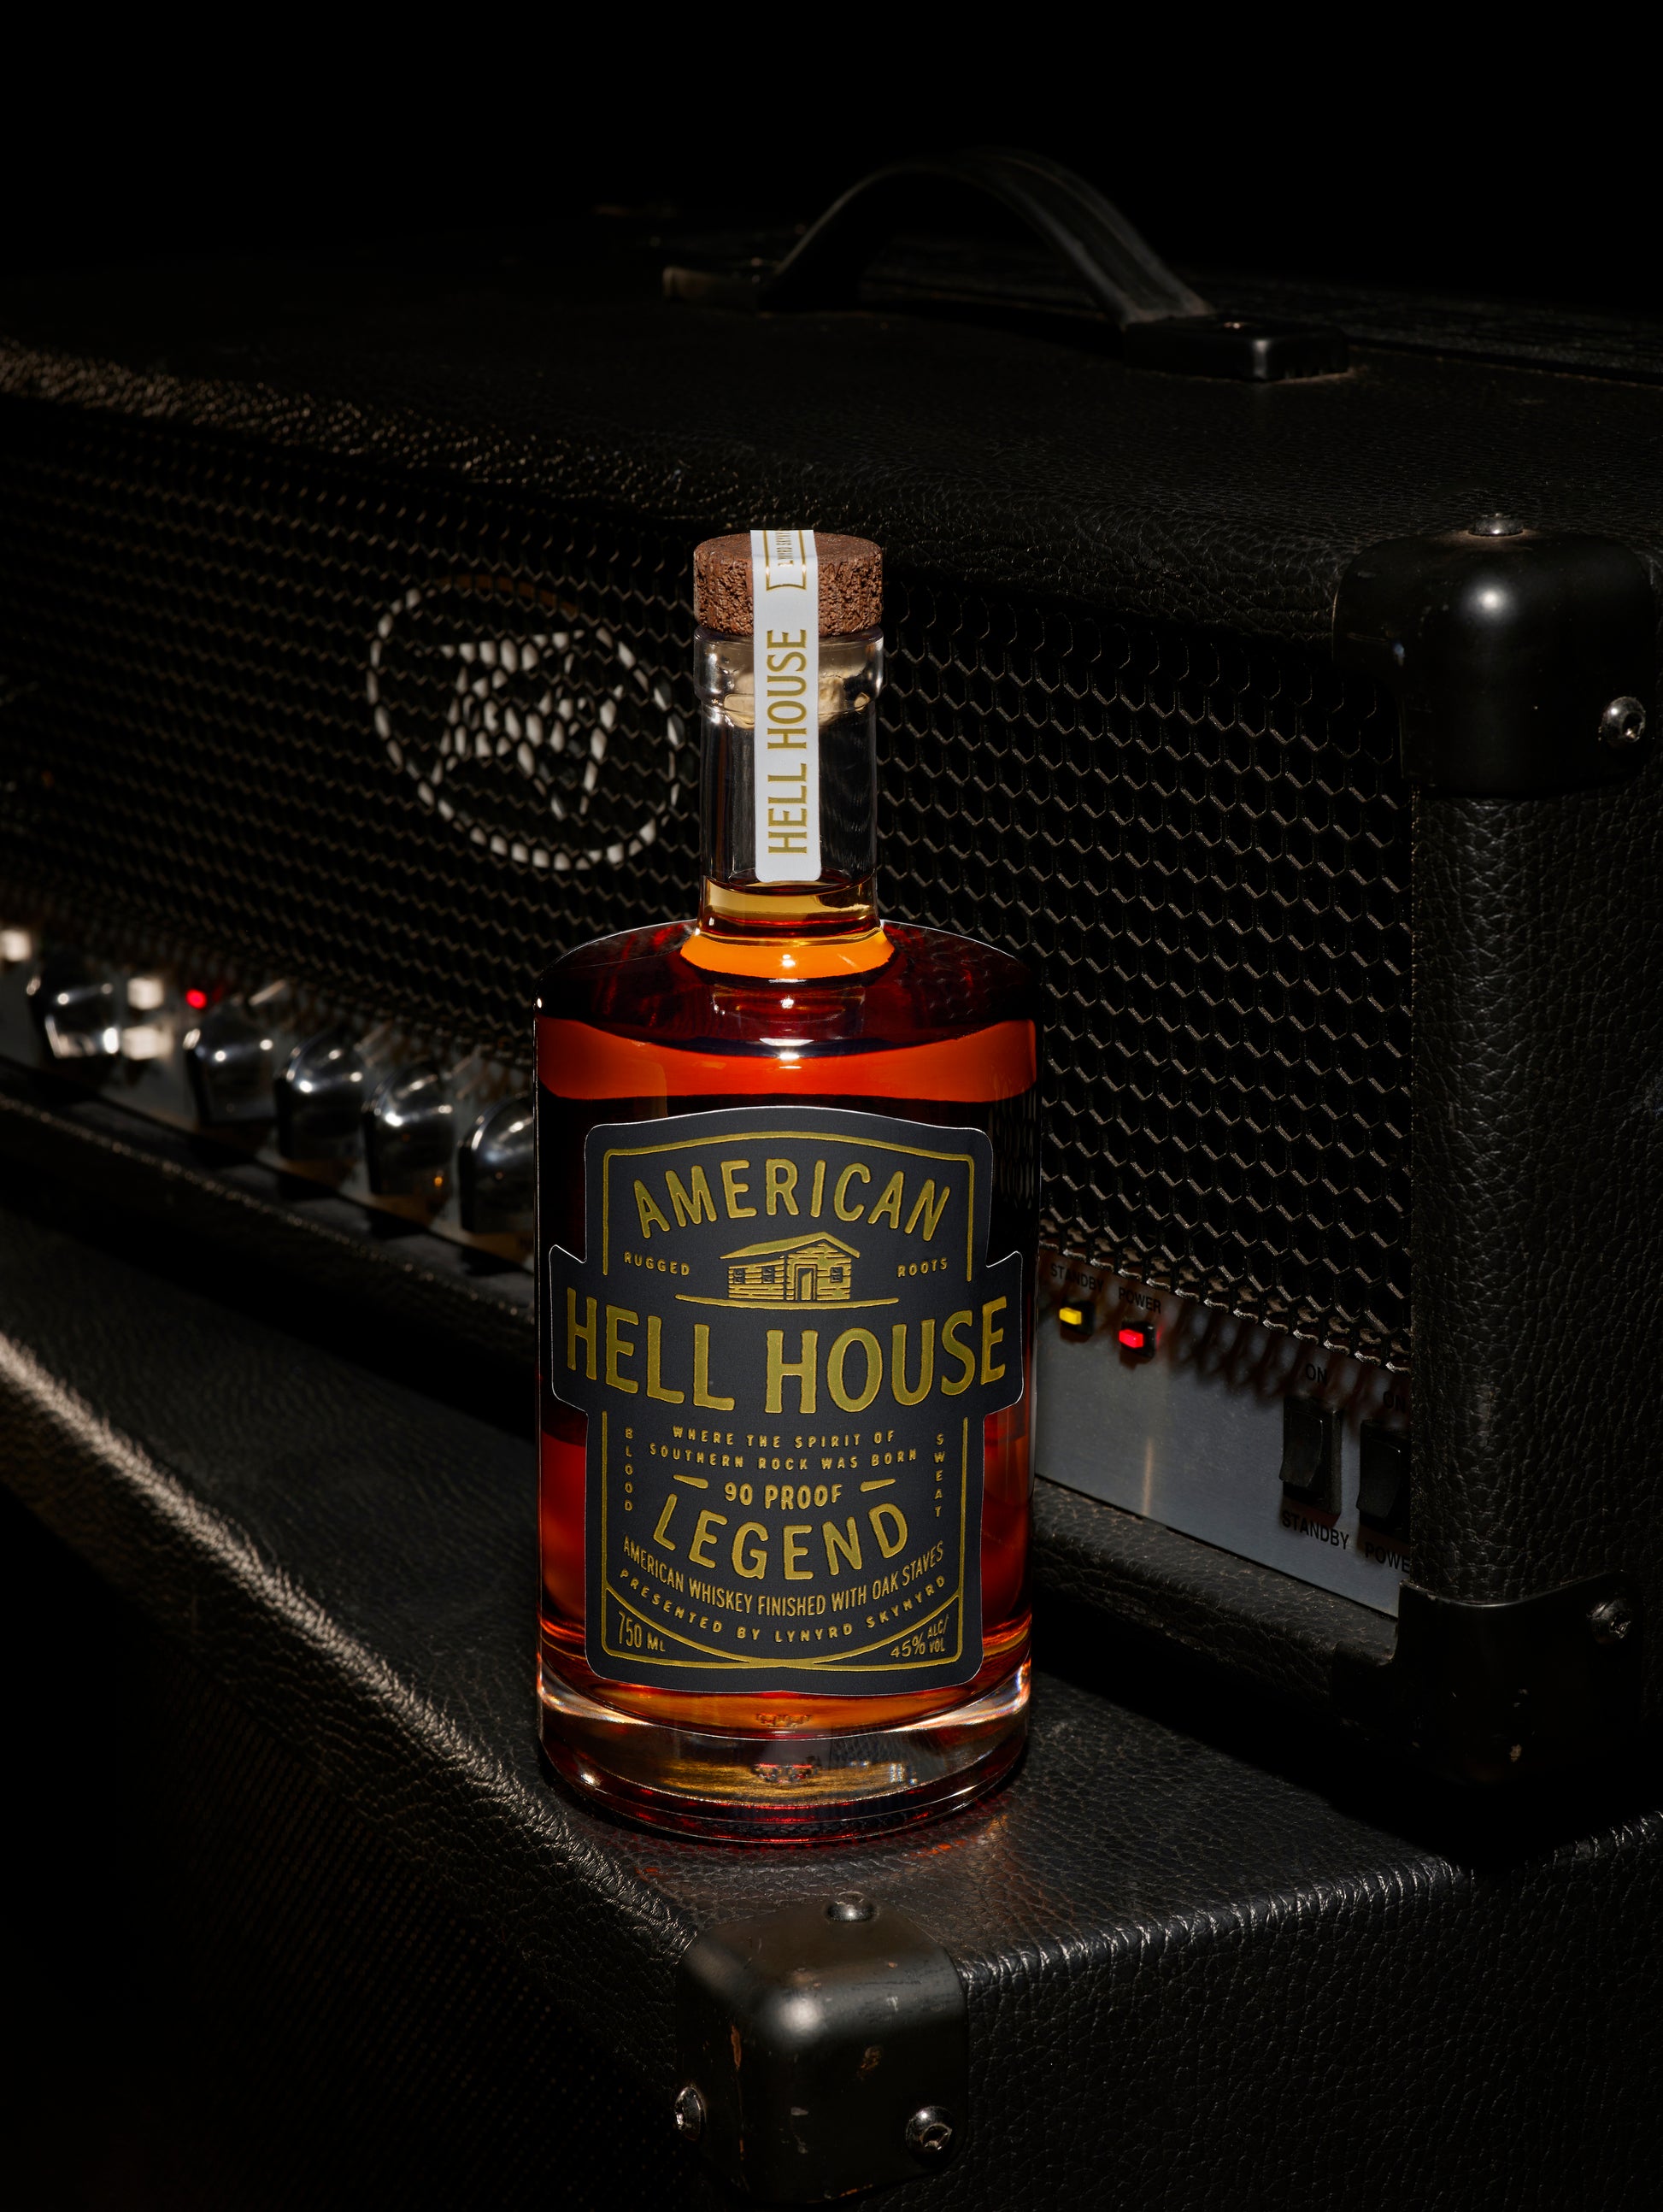 Hell House American Whiskey Lifestyle image